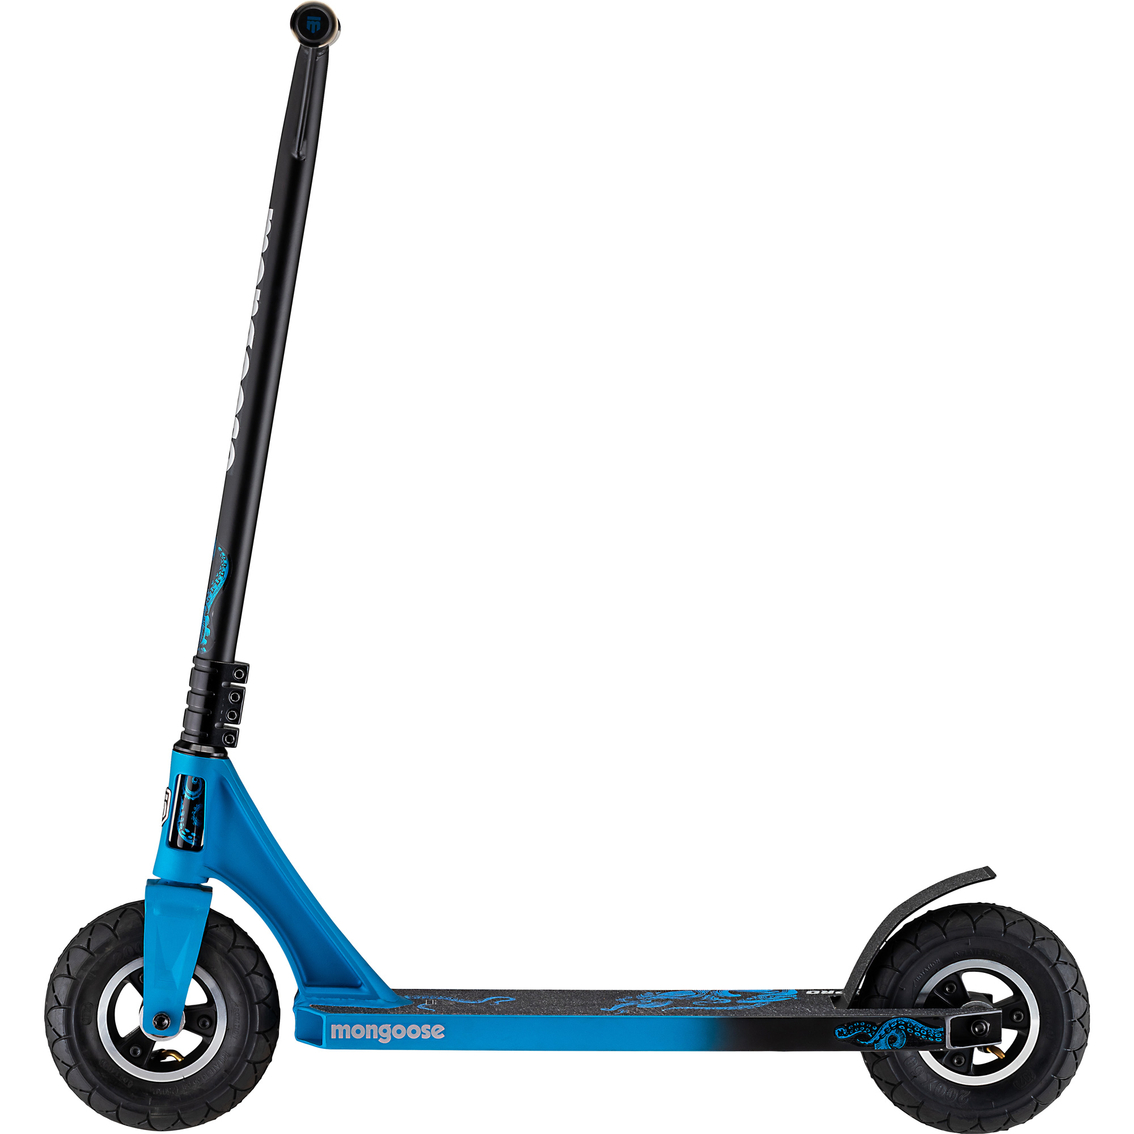 Mongoose Tread Pro Air Freestyle Dirt Scooter - Image 4 of 4